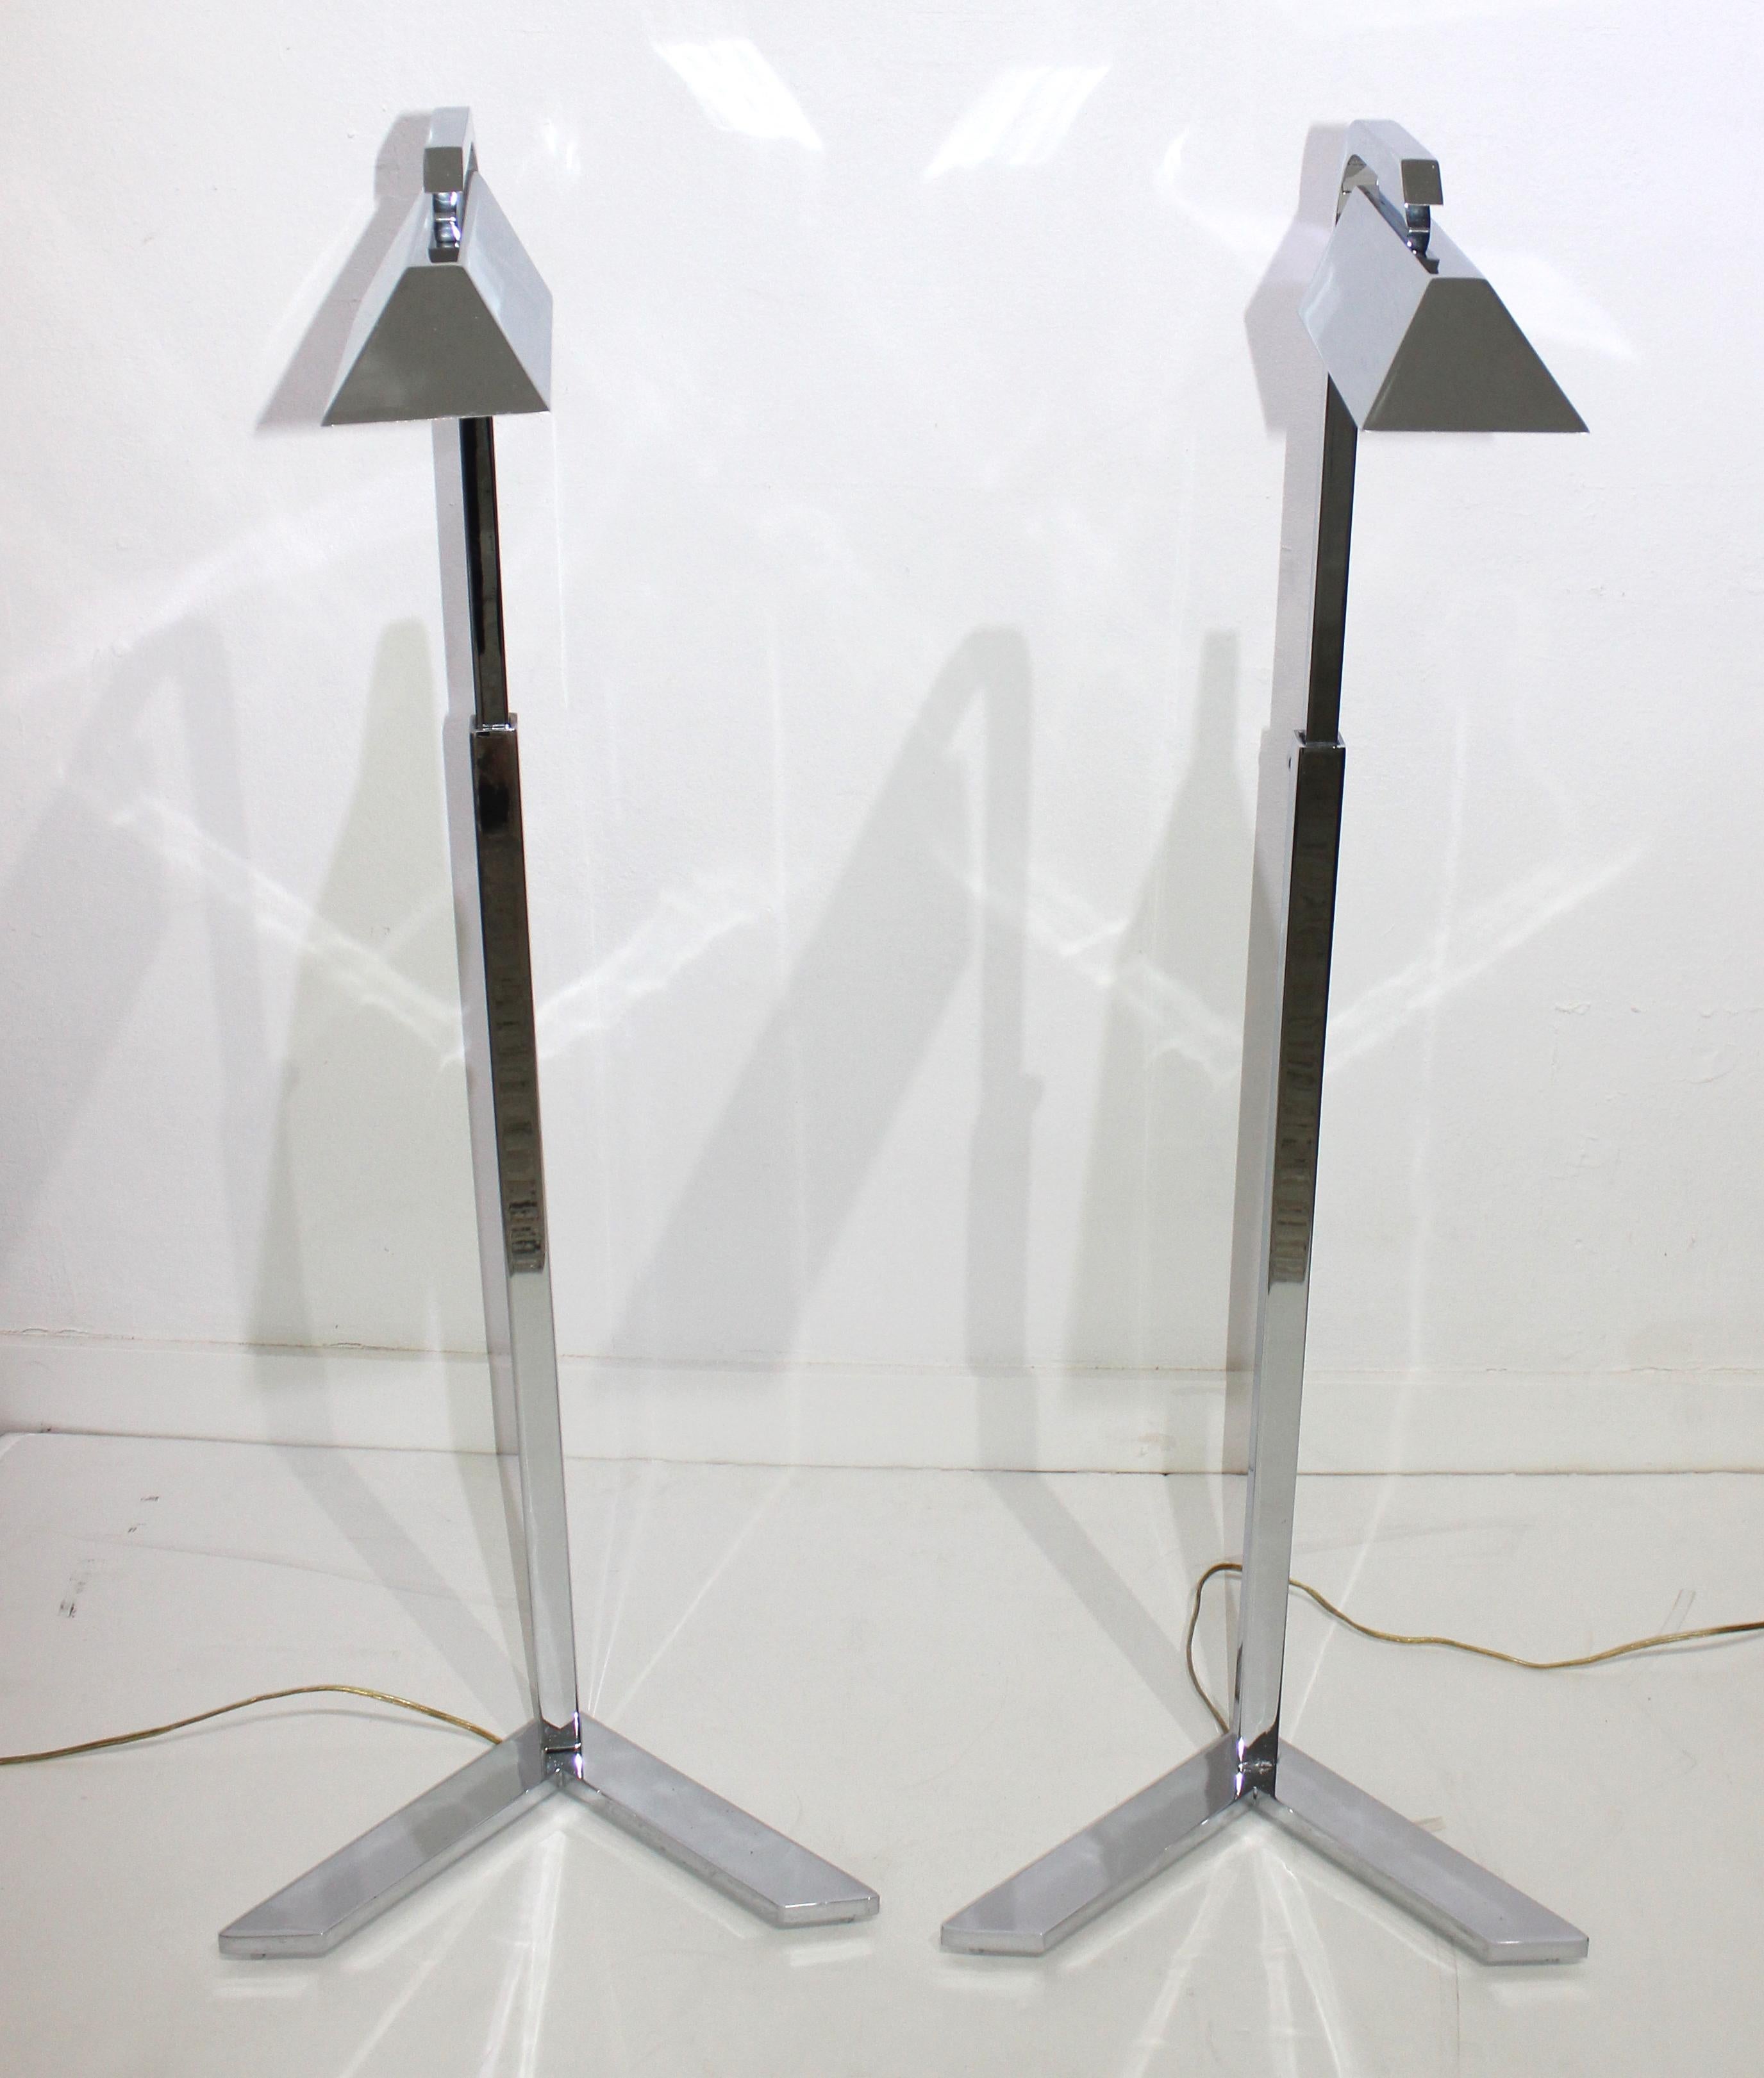 This stylish set of adjustable polished chrome floor lamps are very much in the manner of pieces created by Casella Lighting.

The set dates to the early 2000s and the height adjust from 36